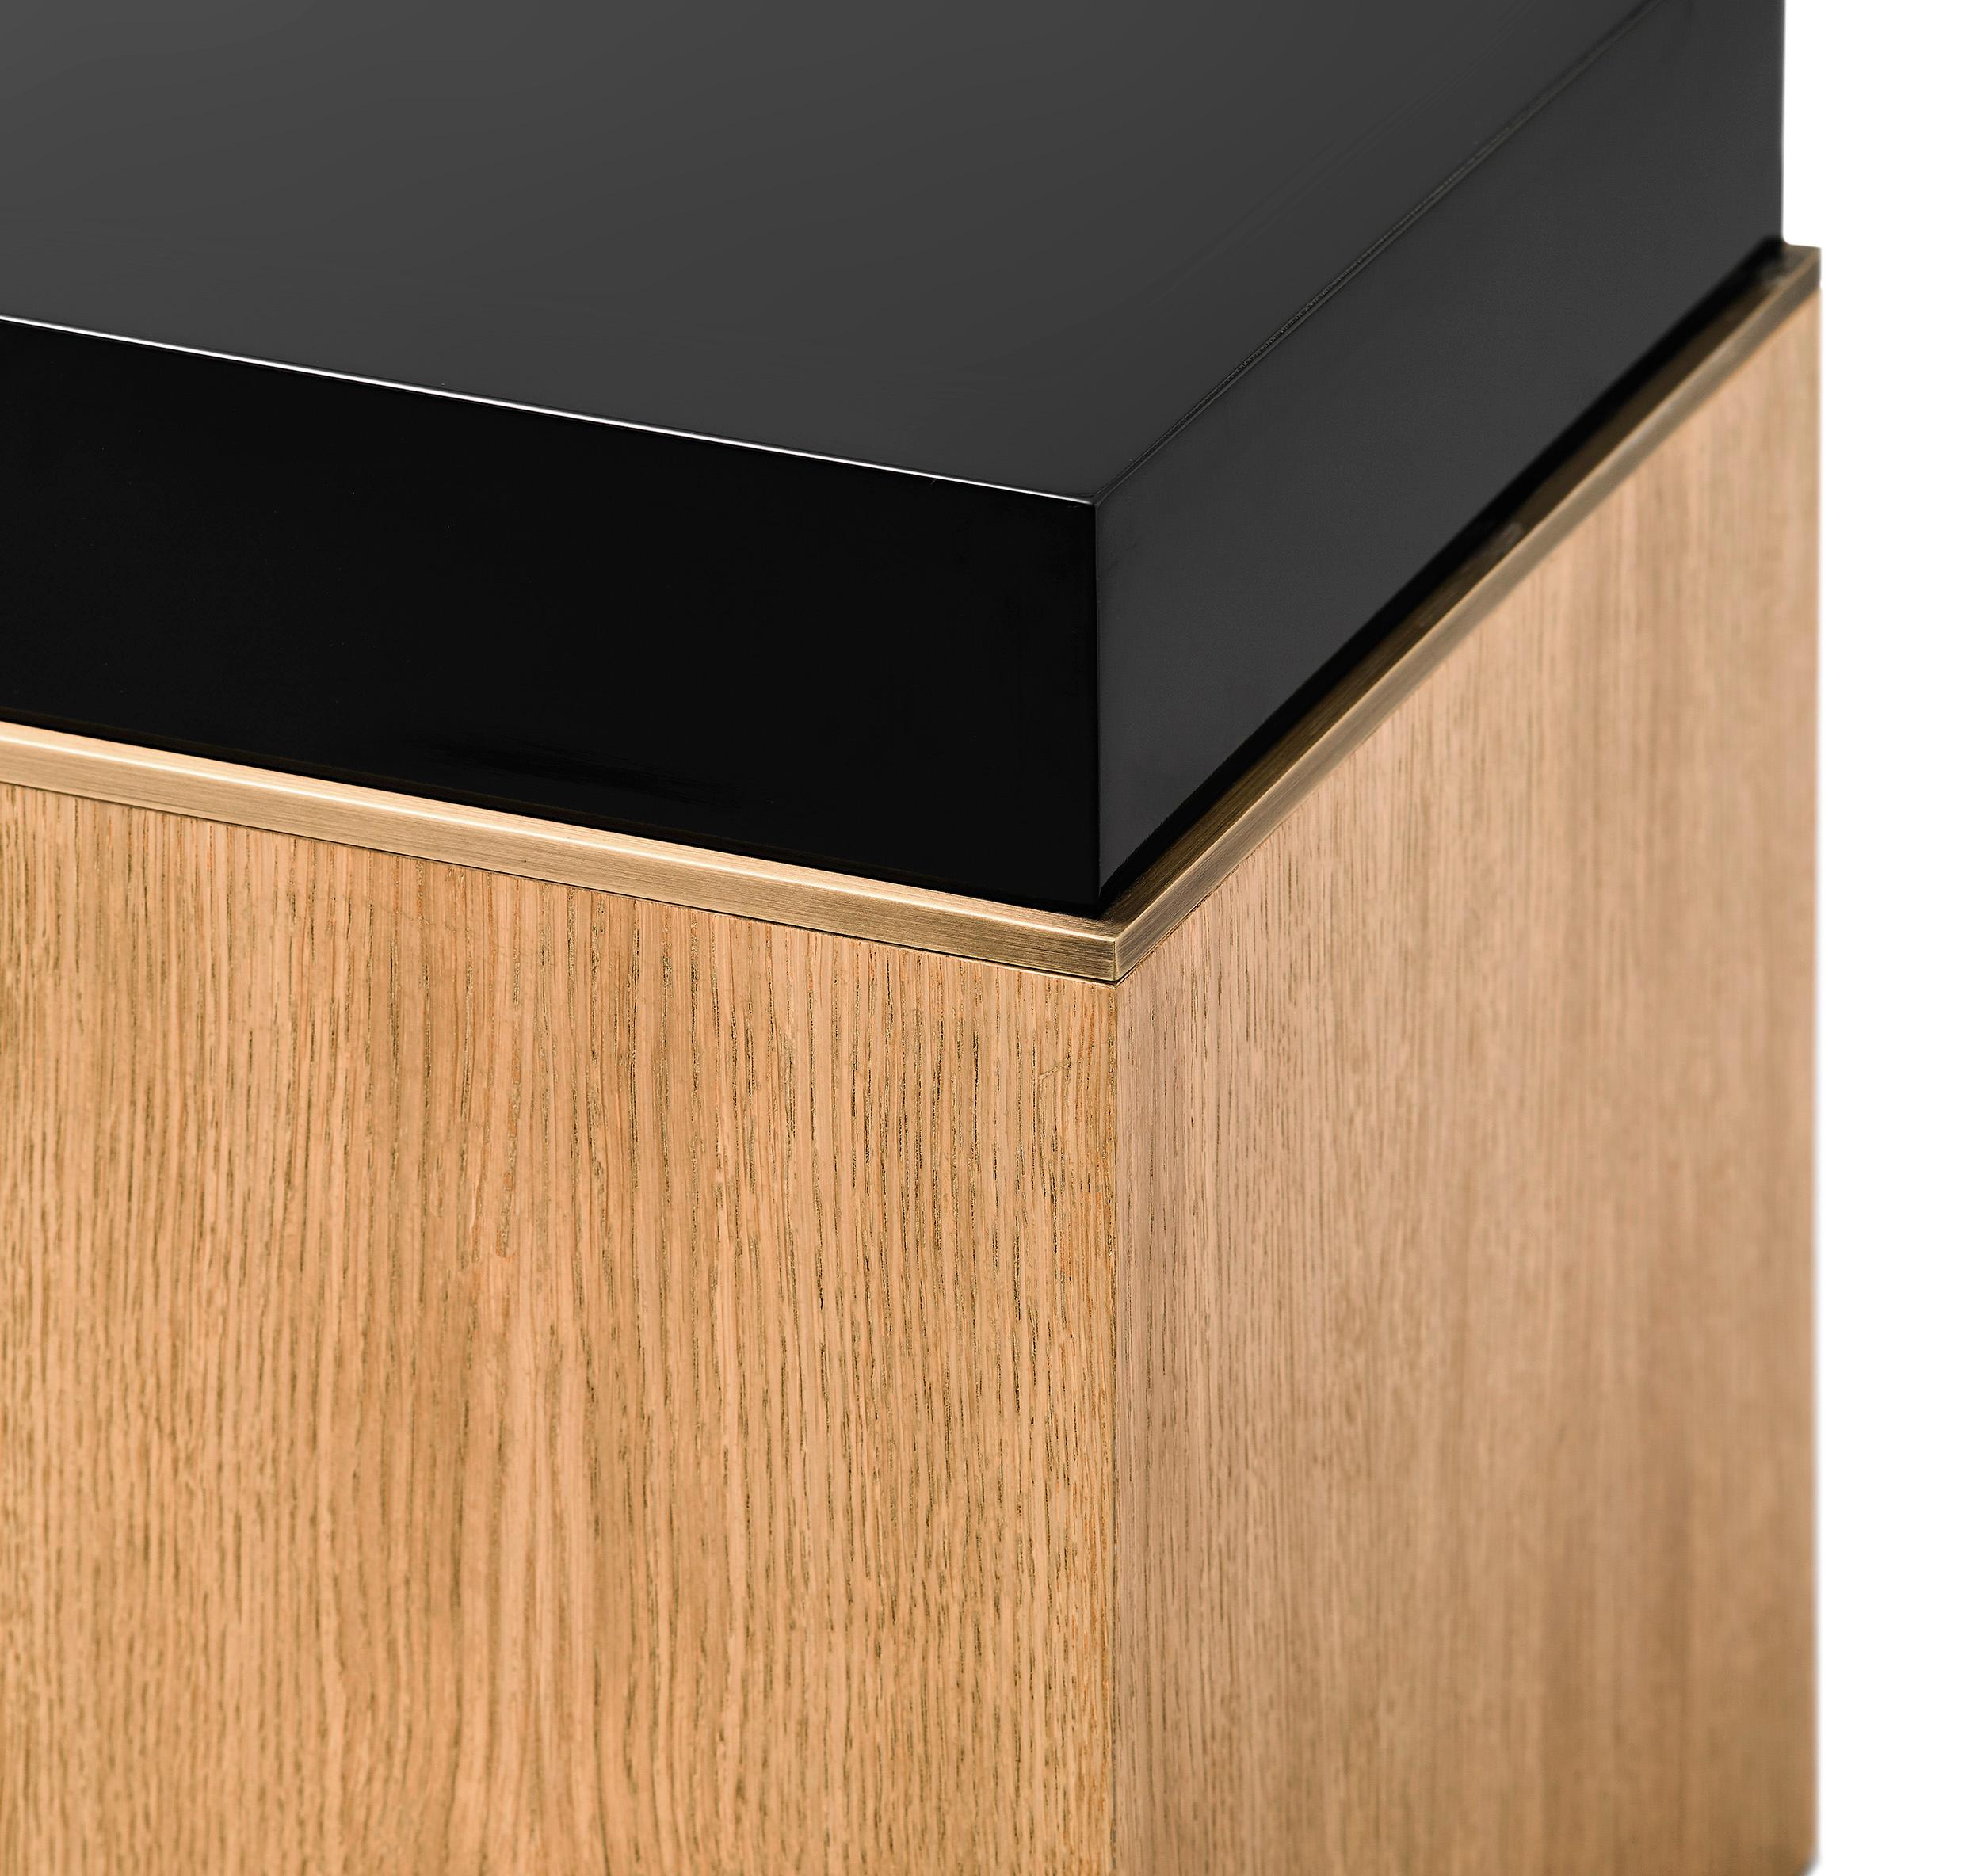 Block Pedestal, Limed Oak and Brass Details, Handcrafted in Portugal by Duistt

The Block Pedestal is a strong masculine piece composed of clean lines and allowing a variety of finishes. The black limed oak creates a contrast against the high gloss